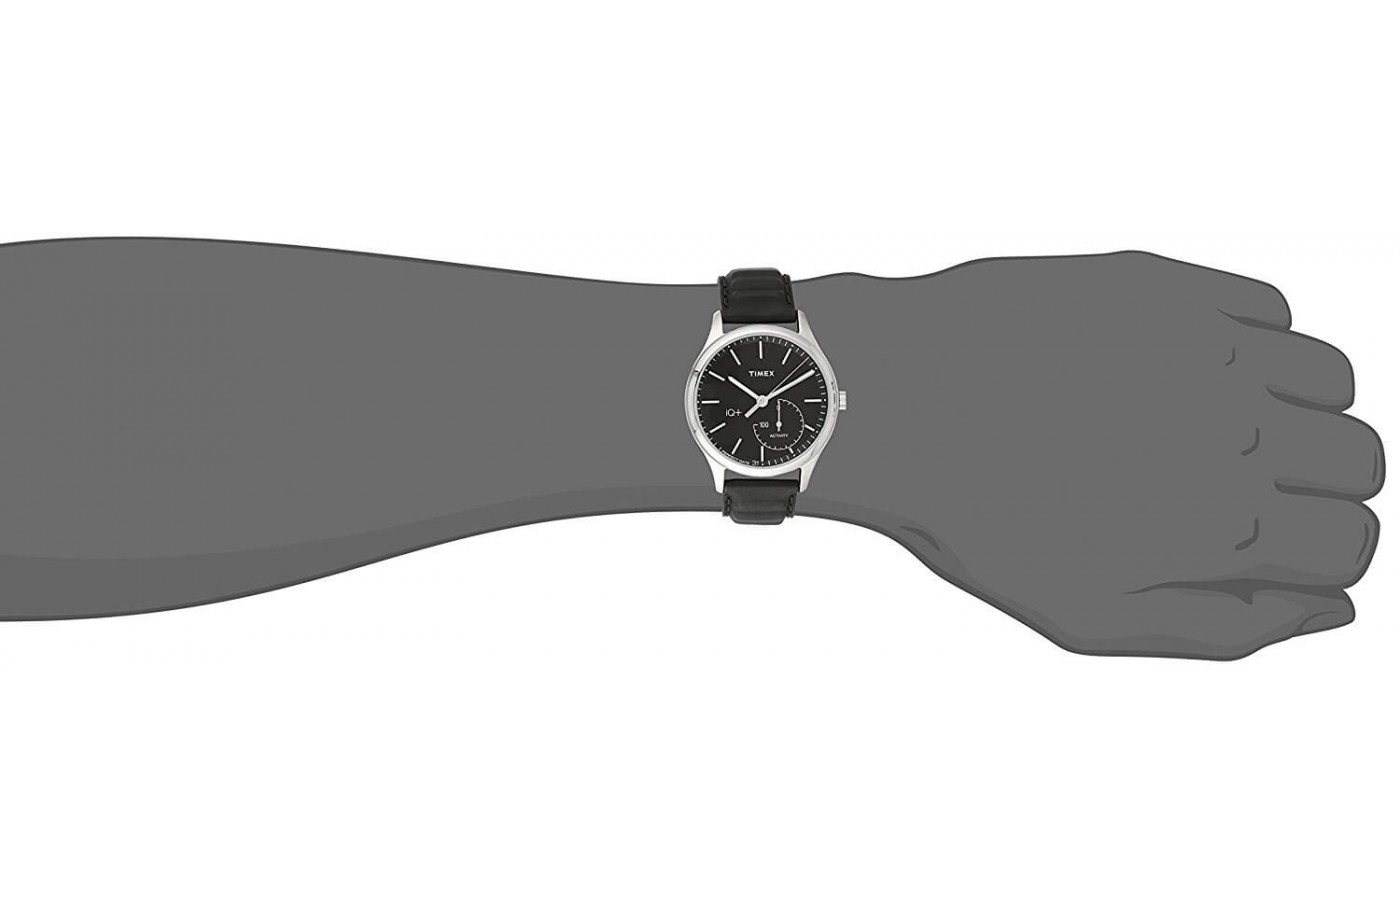 The Timex IQ + Move is Bluetooth enabled